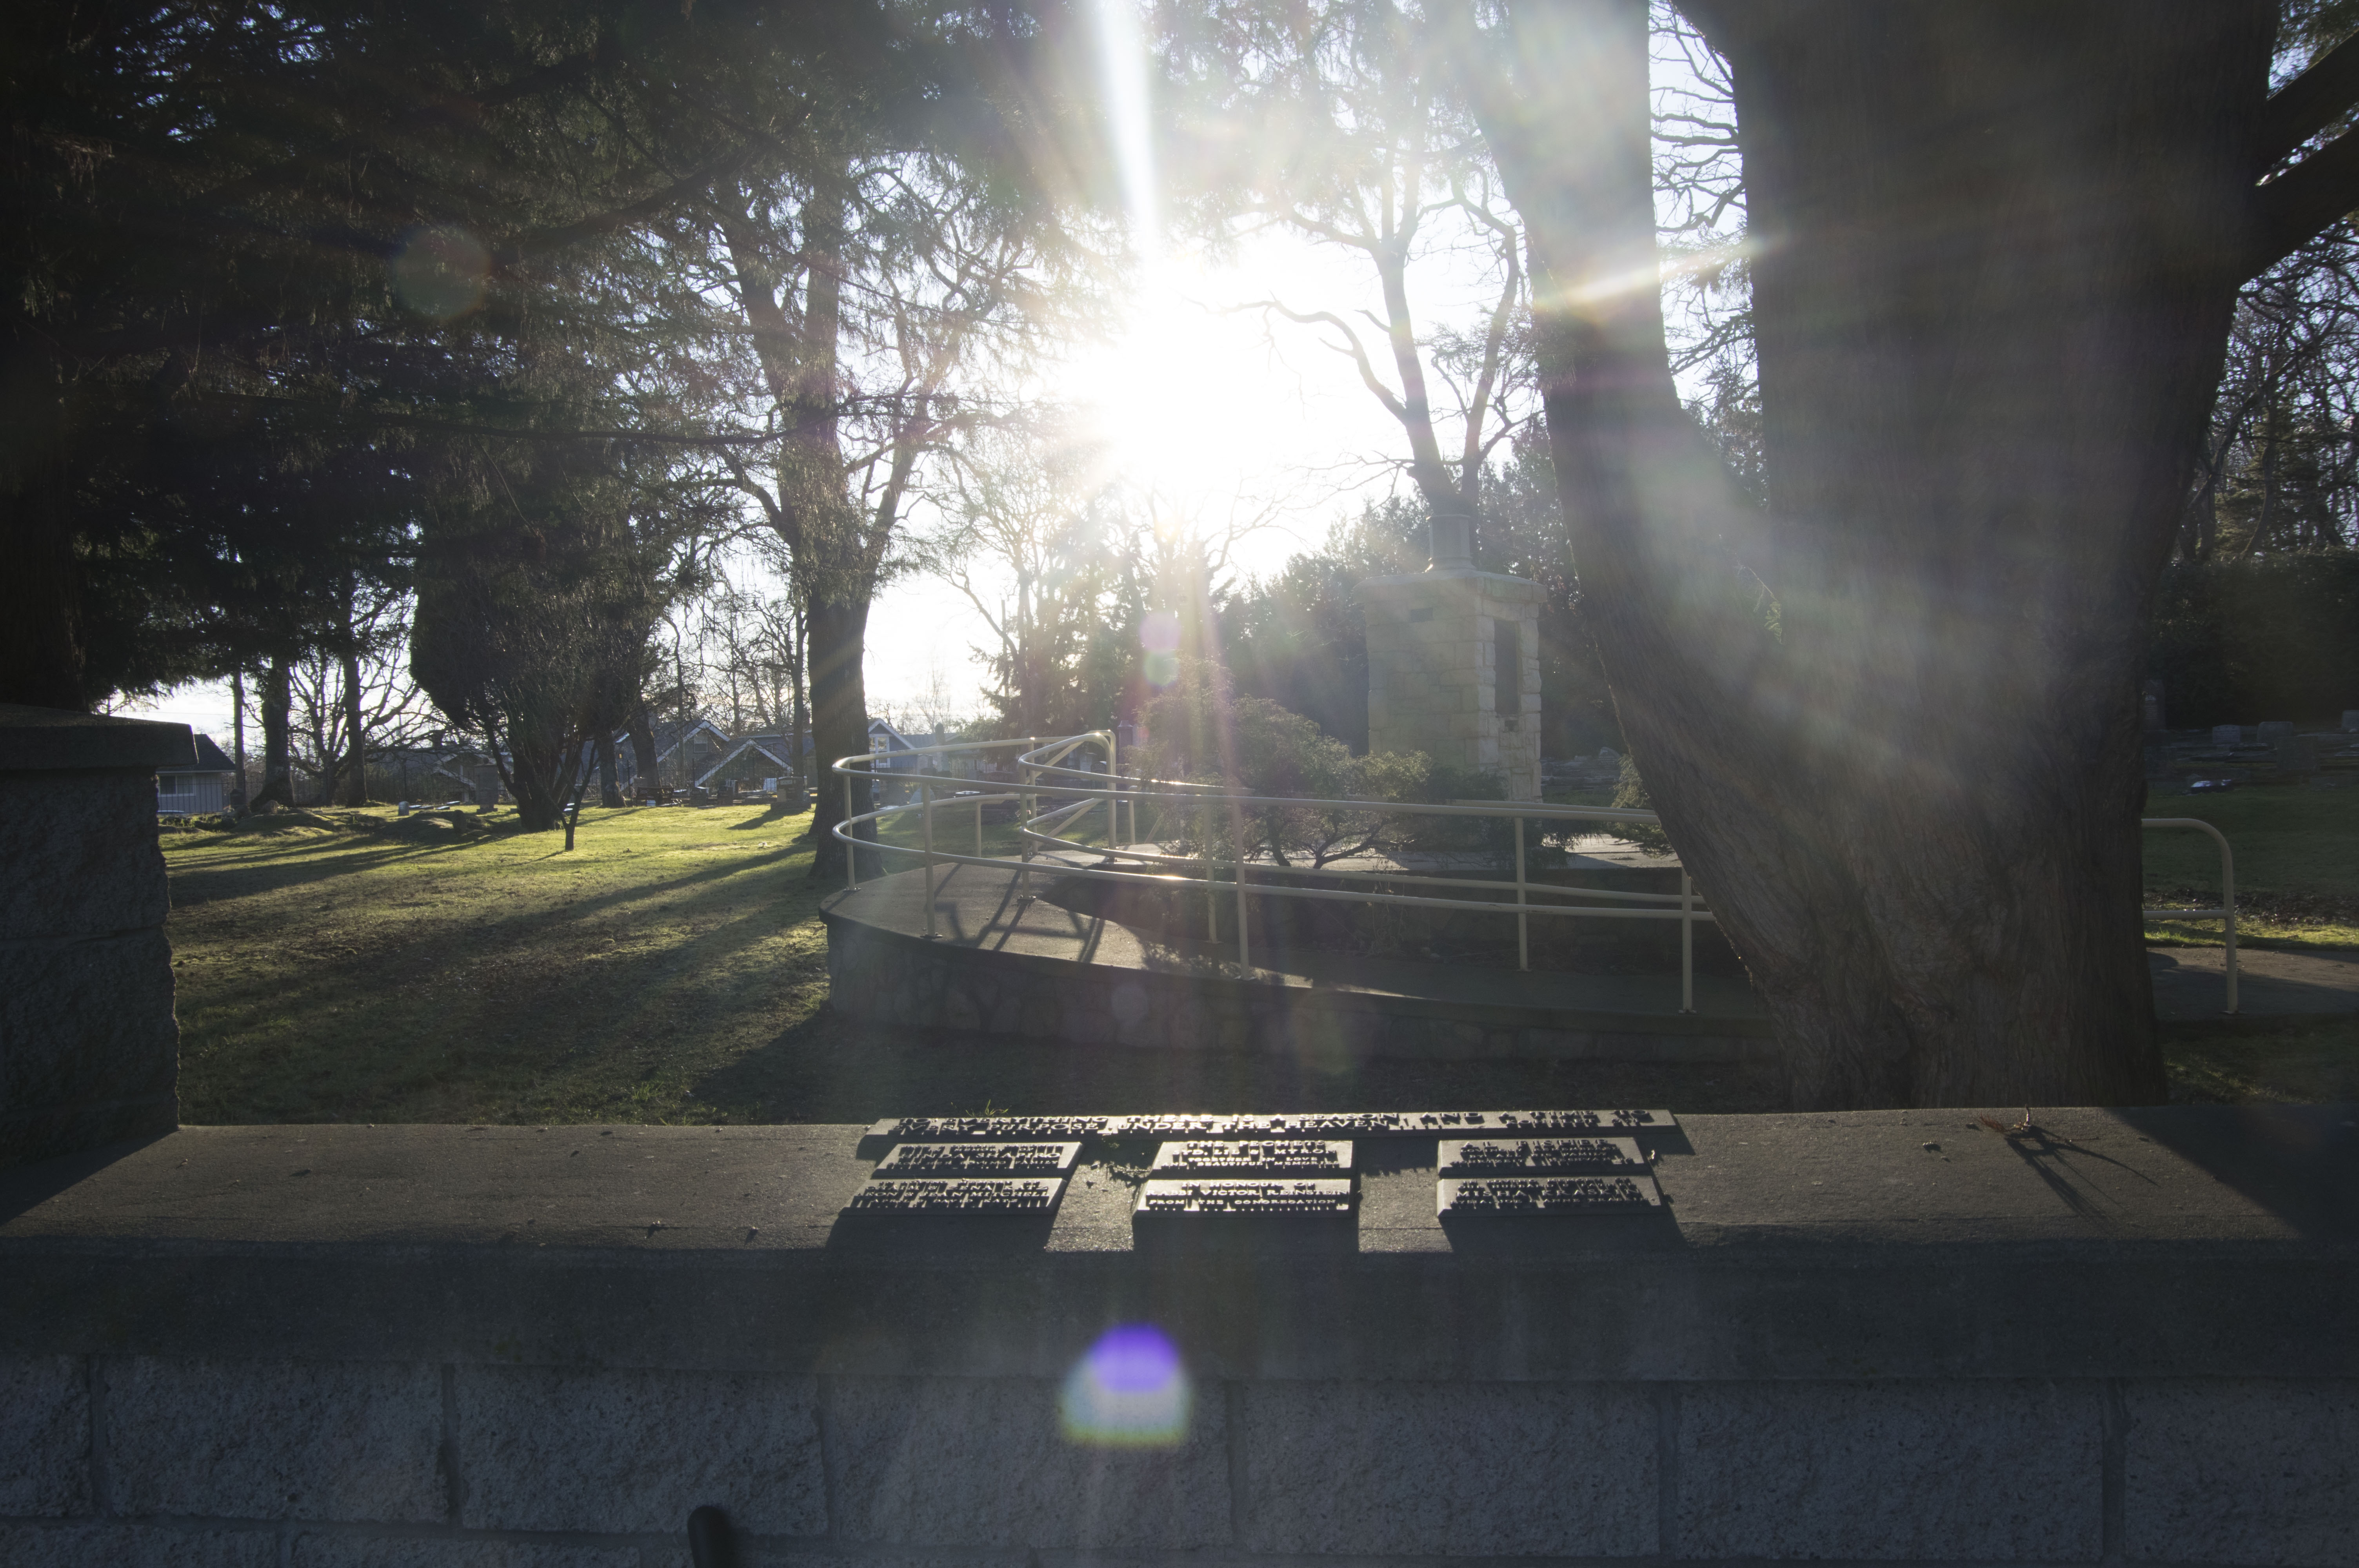 War Memorial at the Emmanu-El Cemetery, Victoria BC. Image by Melanie Heizer, February 2017.